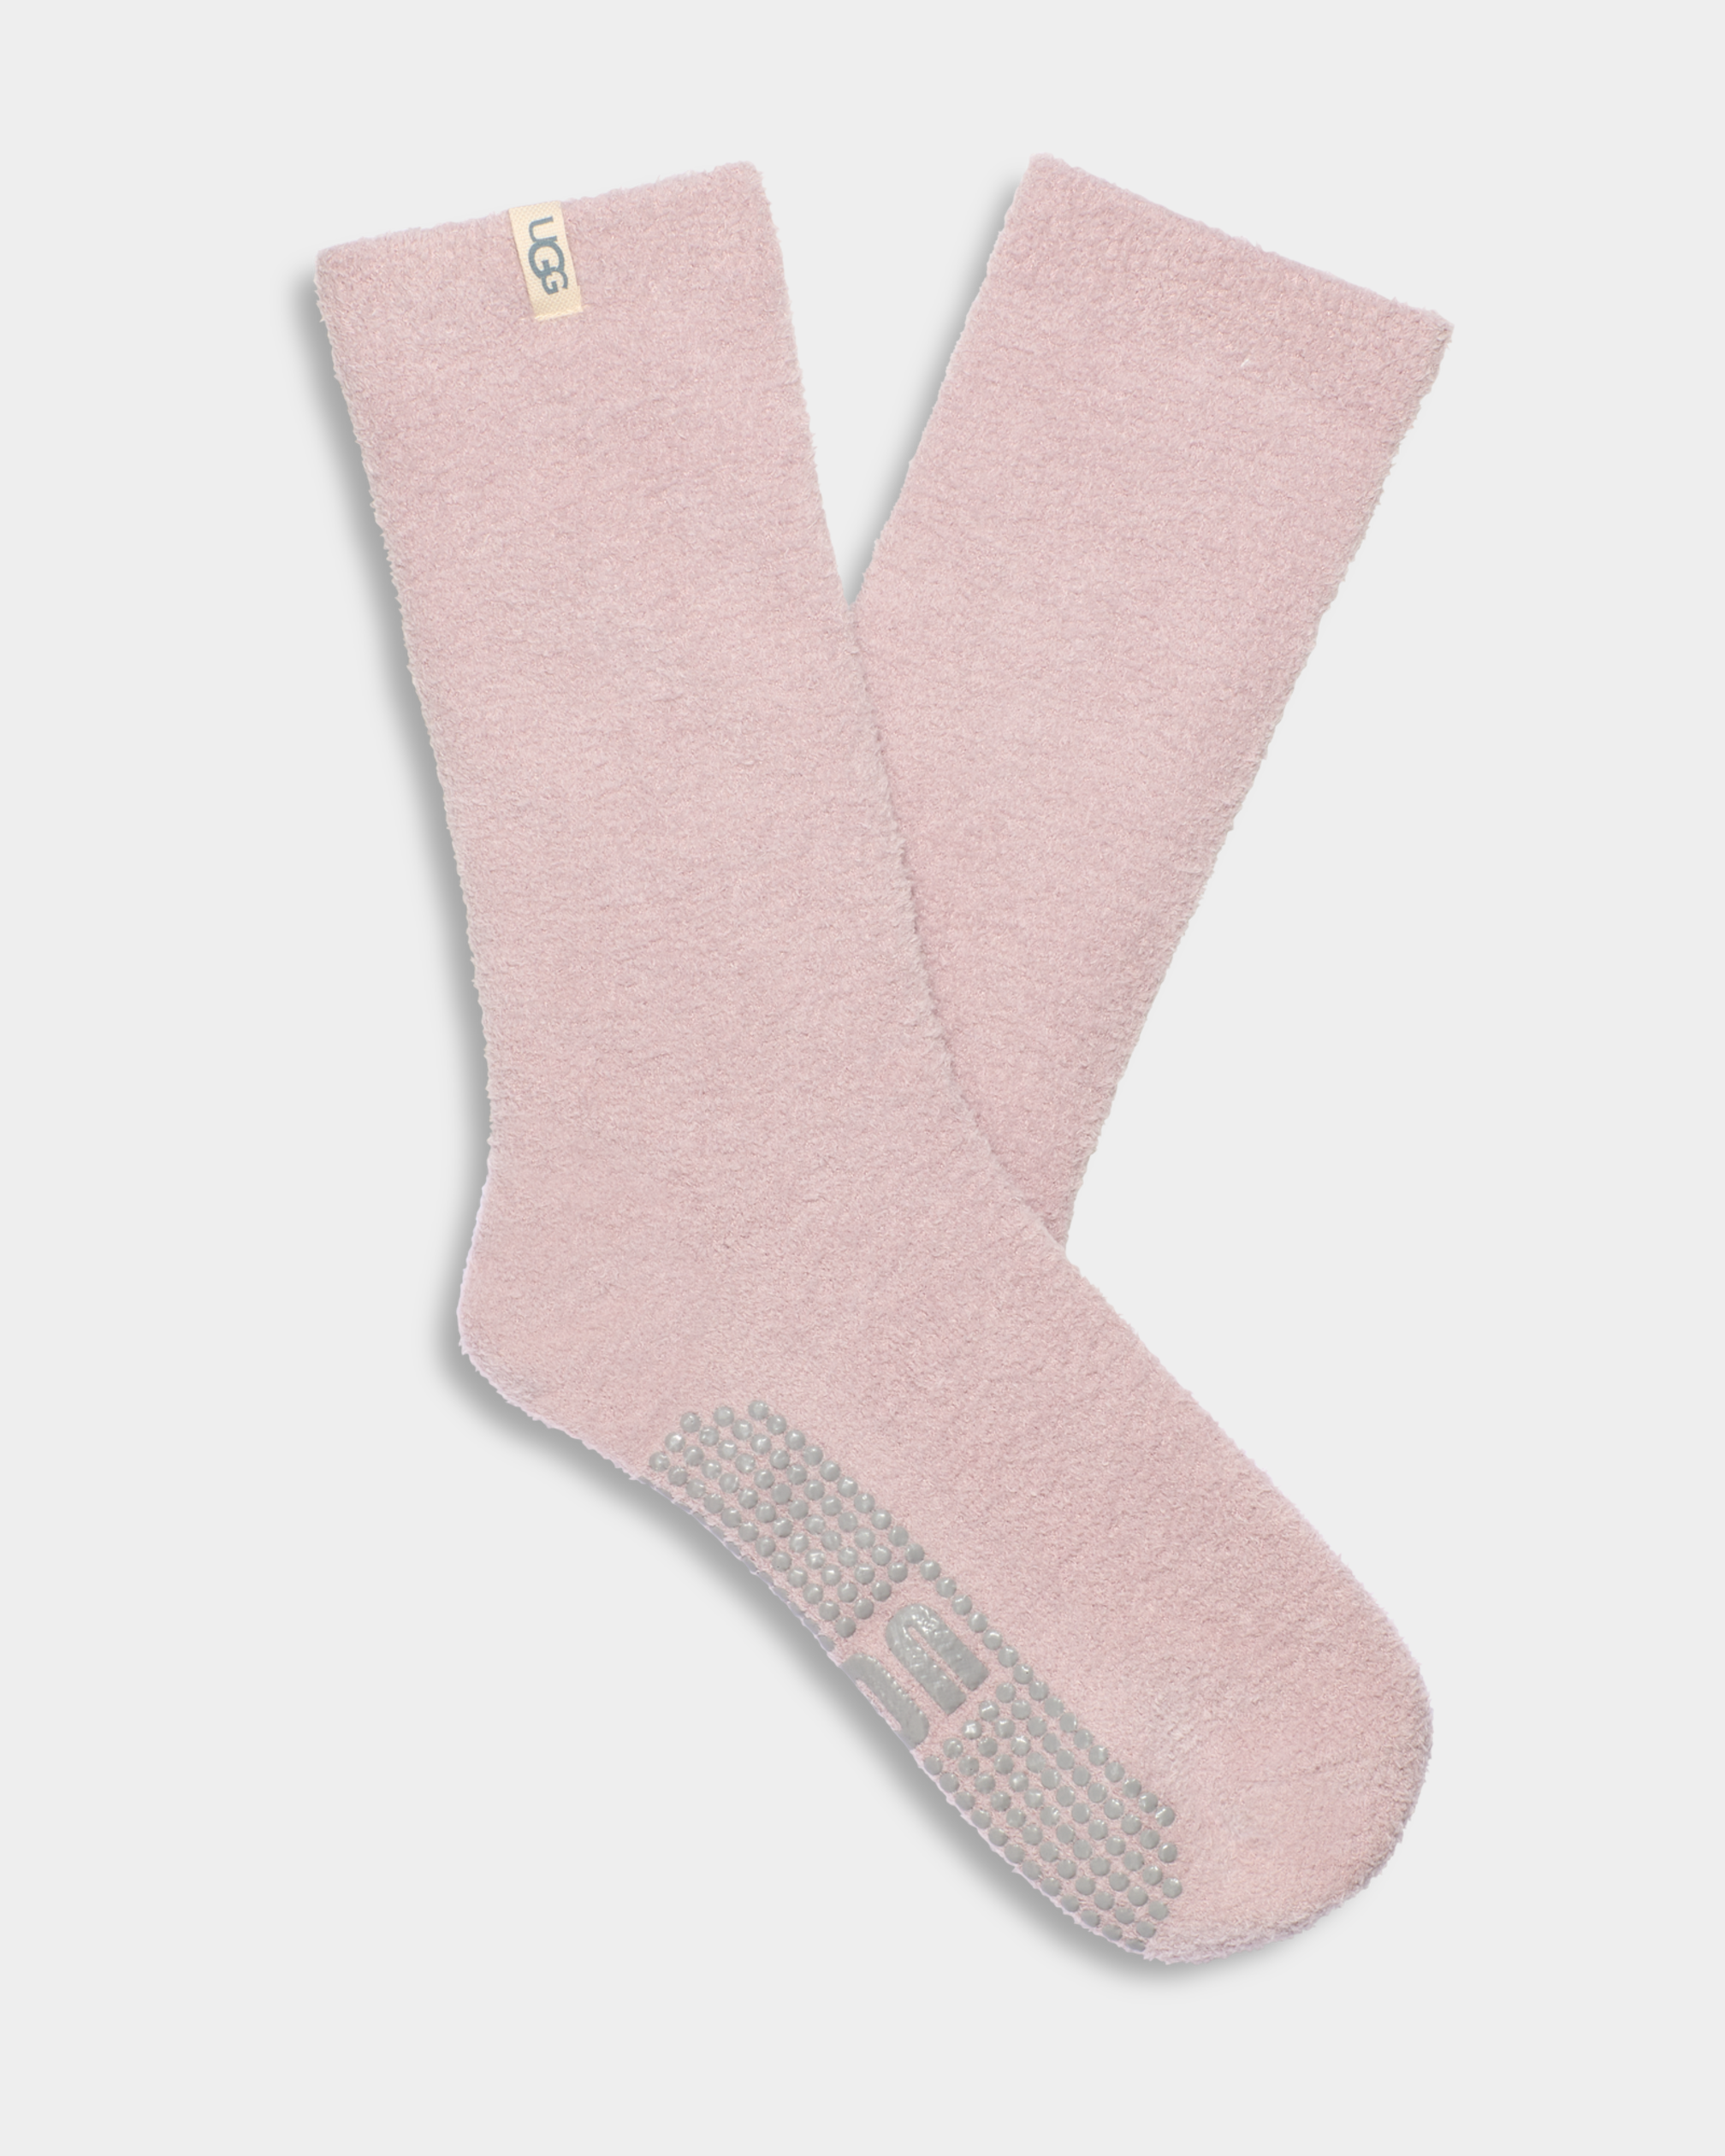 Cozy Cabin & Hospital Socks with Grip for Women-GoWith